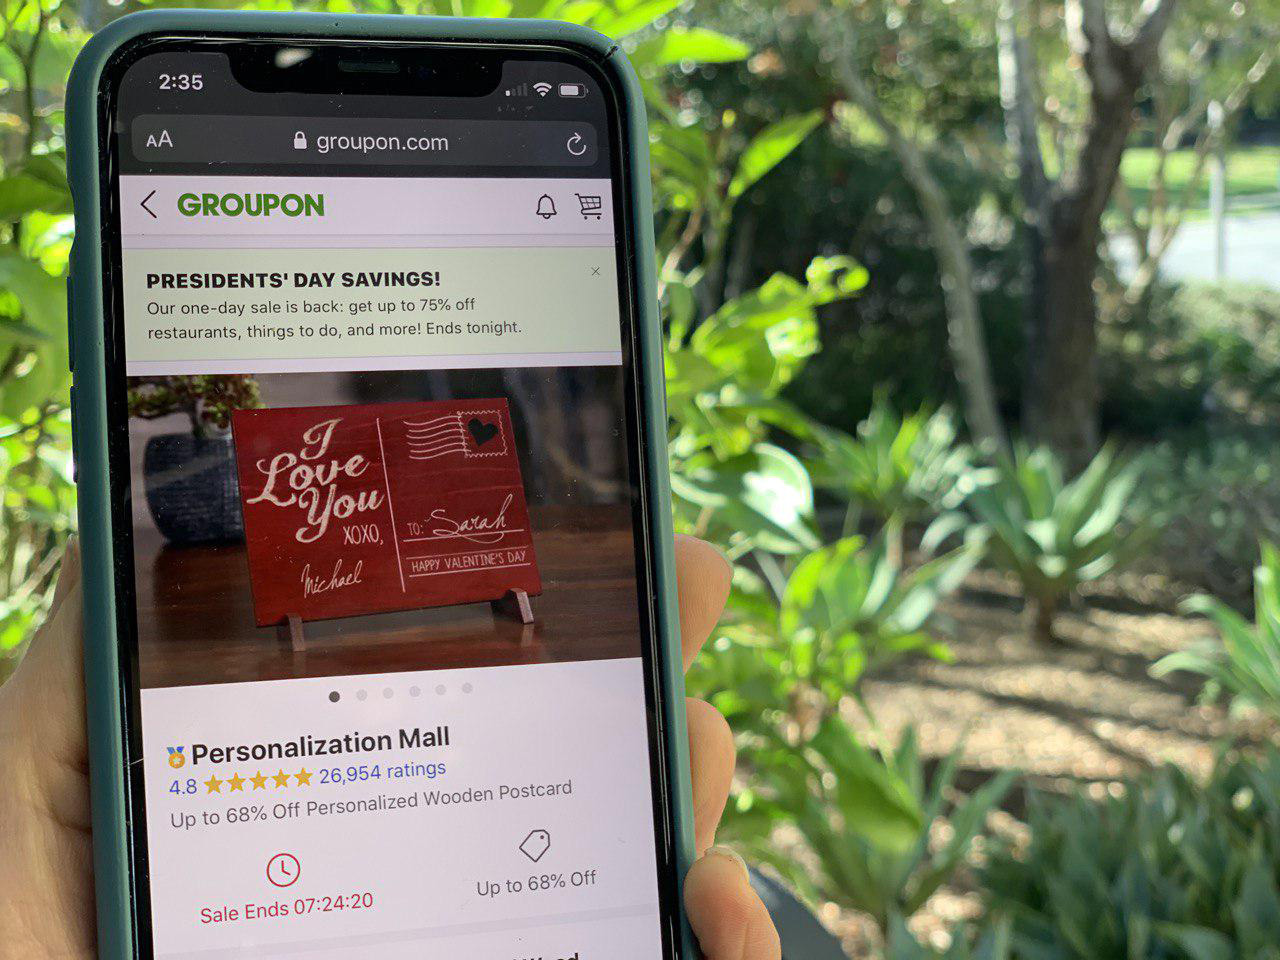 Personalization Mall Groupon Discount